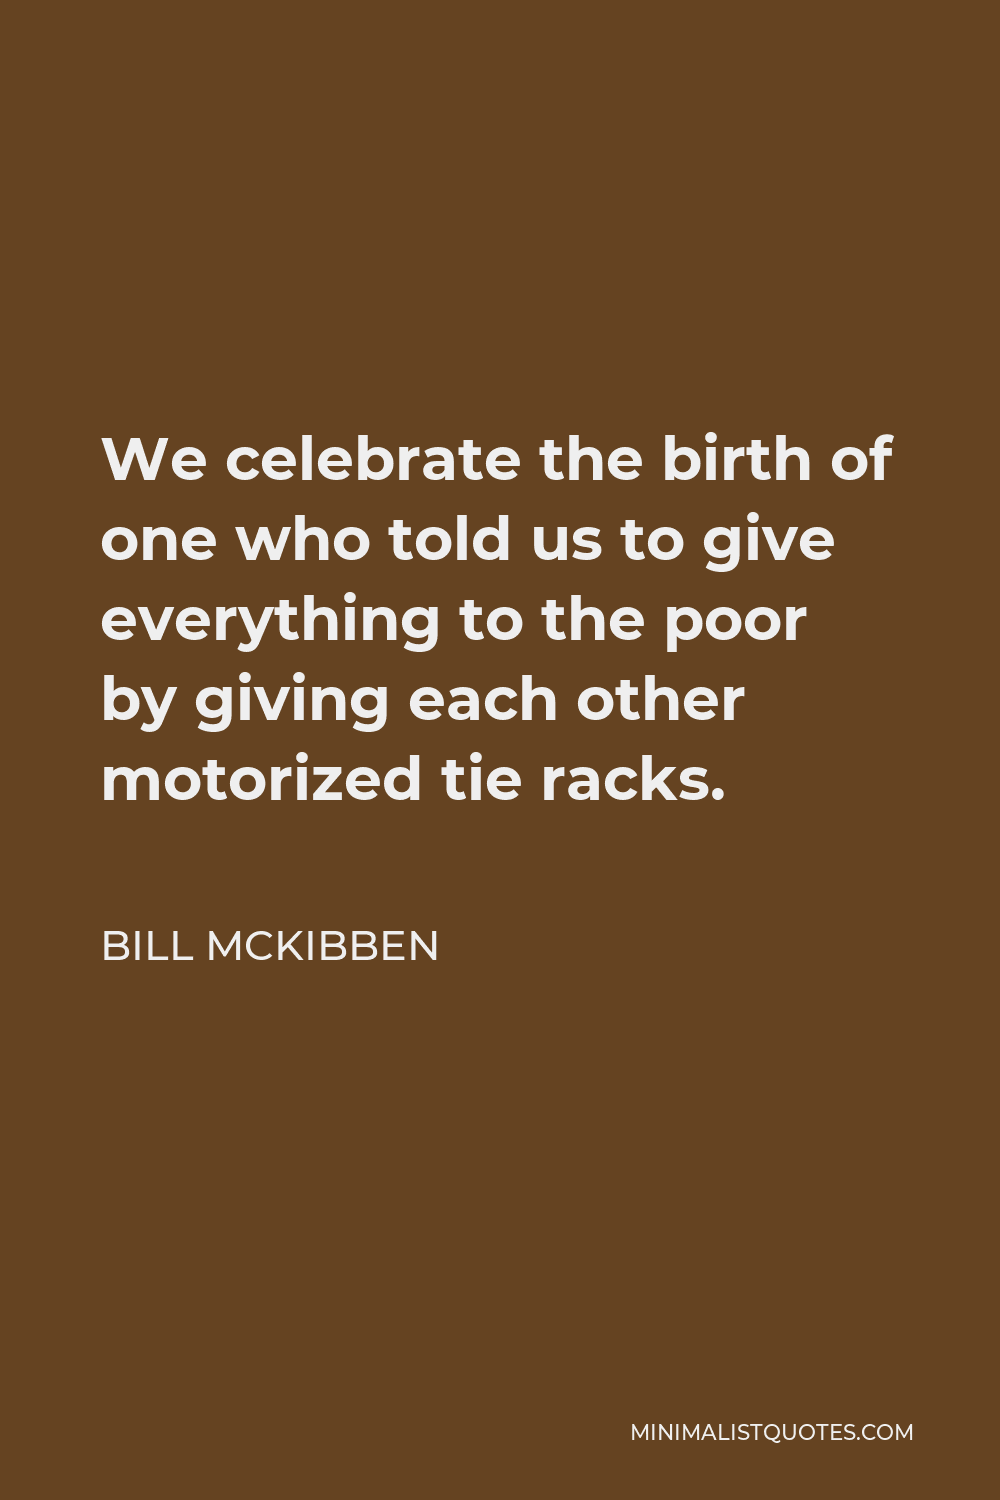 Bill McKibben Quote - We celebrate the birth of one who told us to give everything to the poor by giving each other motorized tie racks.